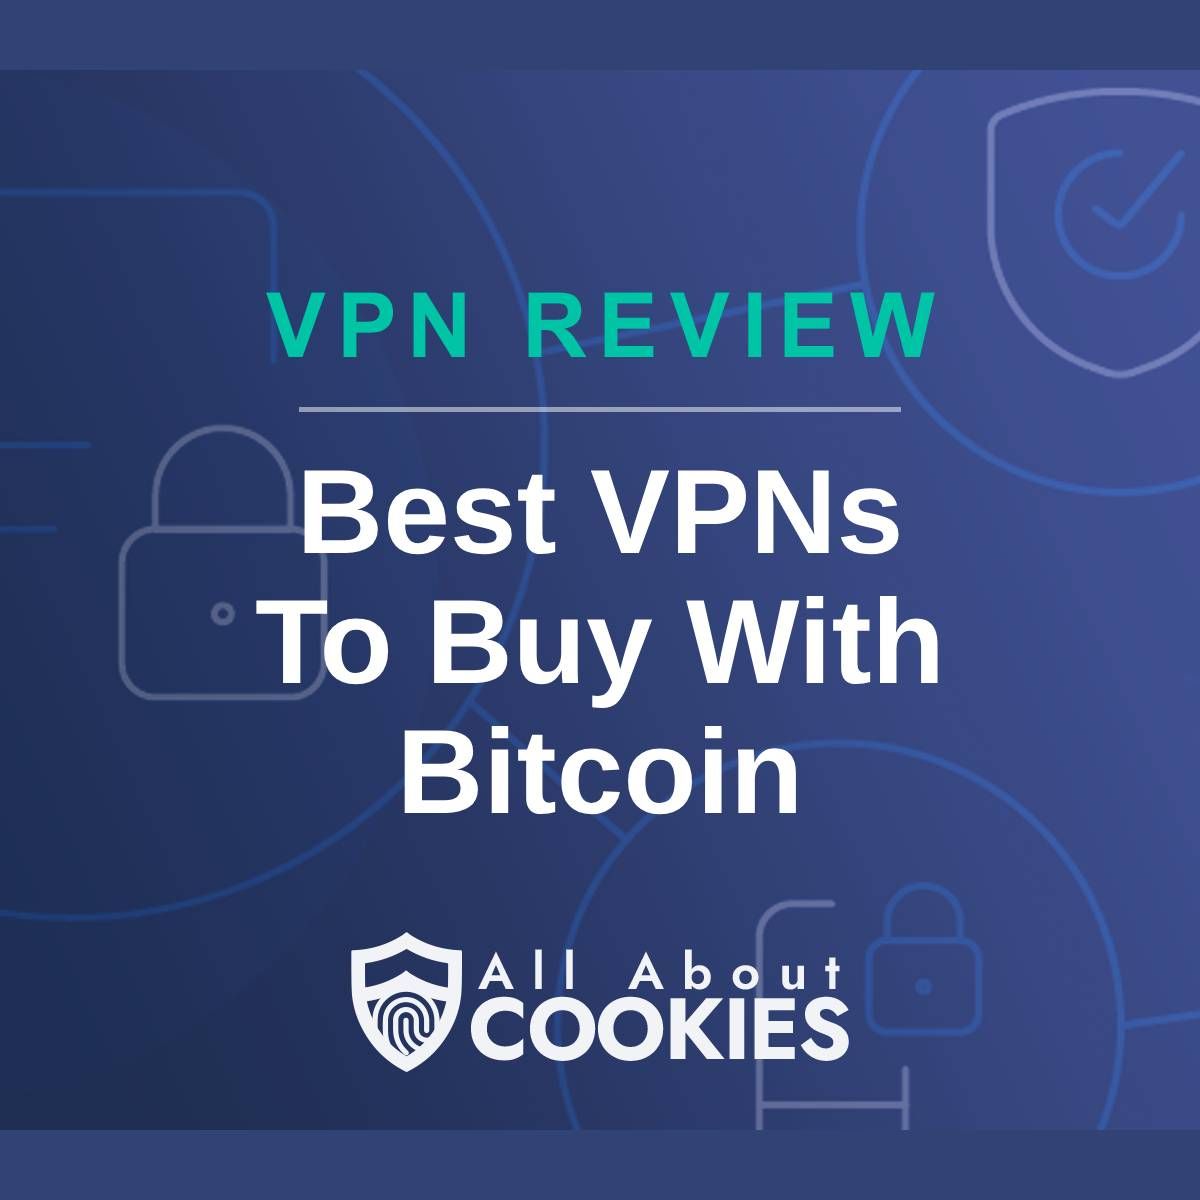 A blue background with images of locks and shields and the text &quot;best VPNs To Buy With Bitcoin&quot;